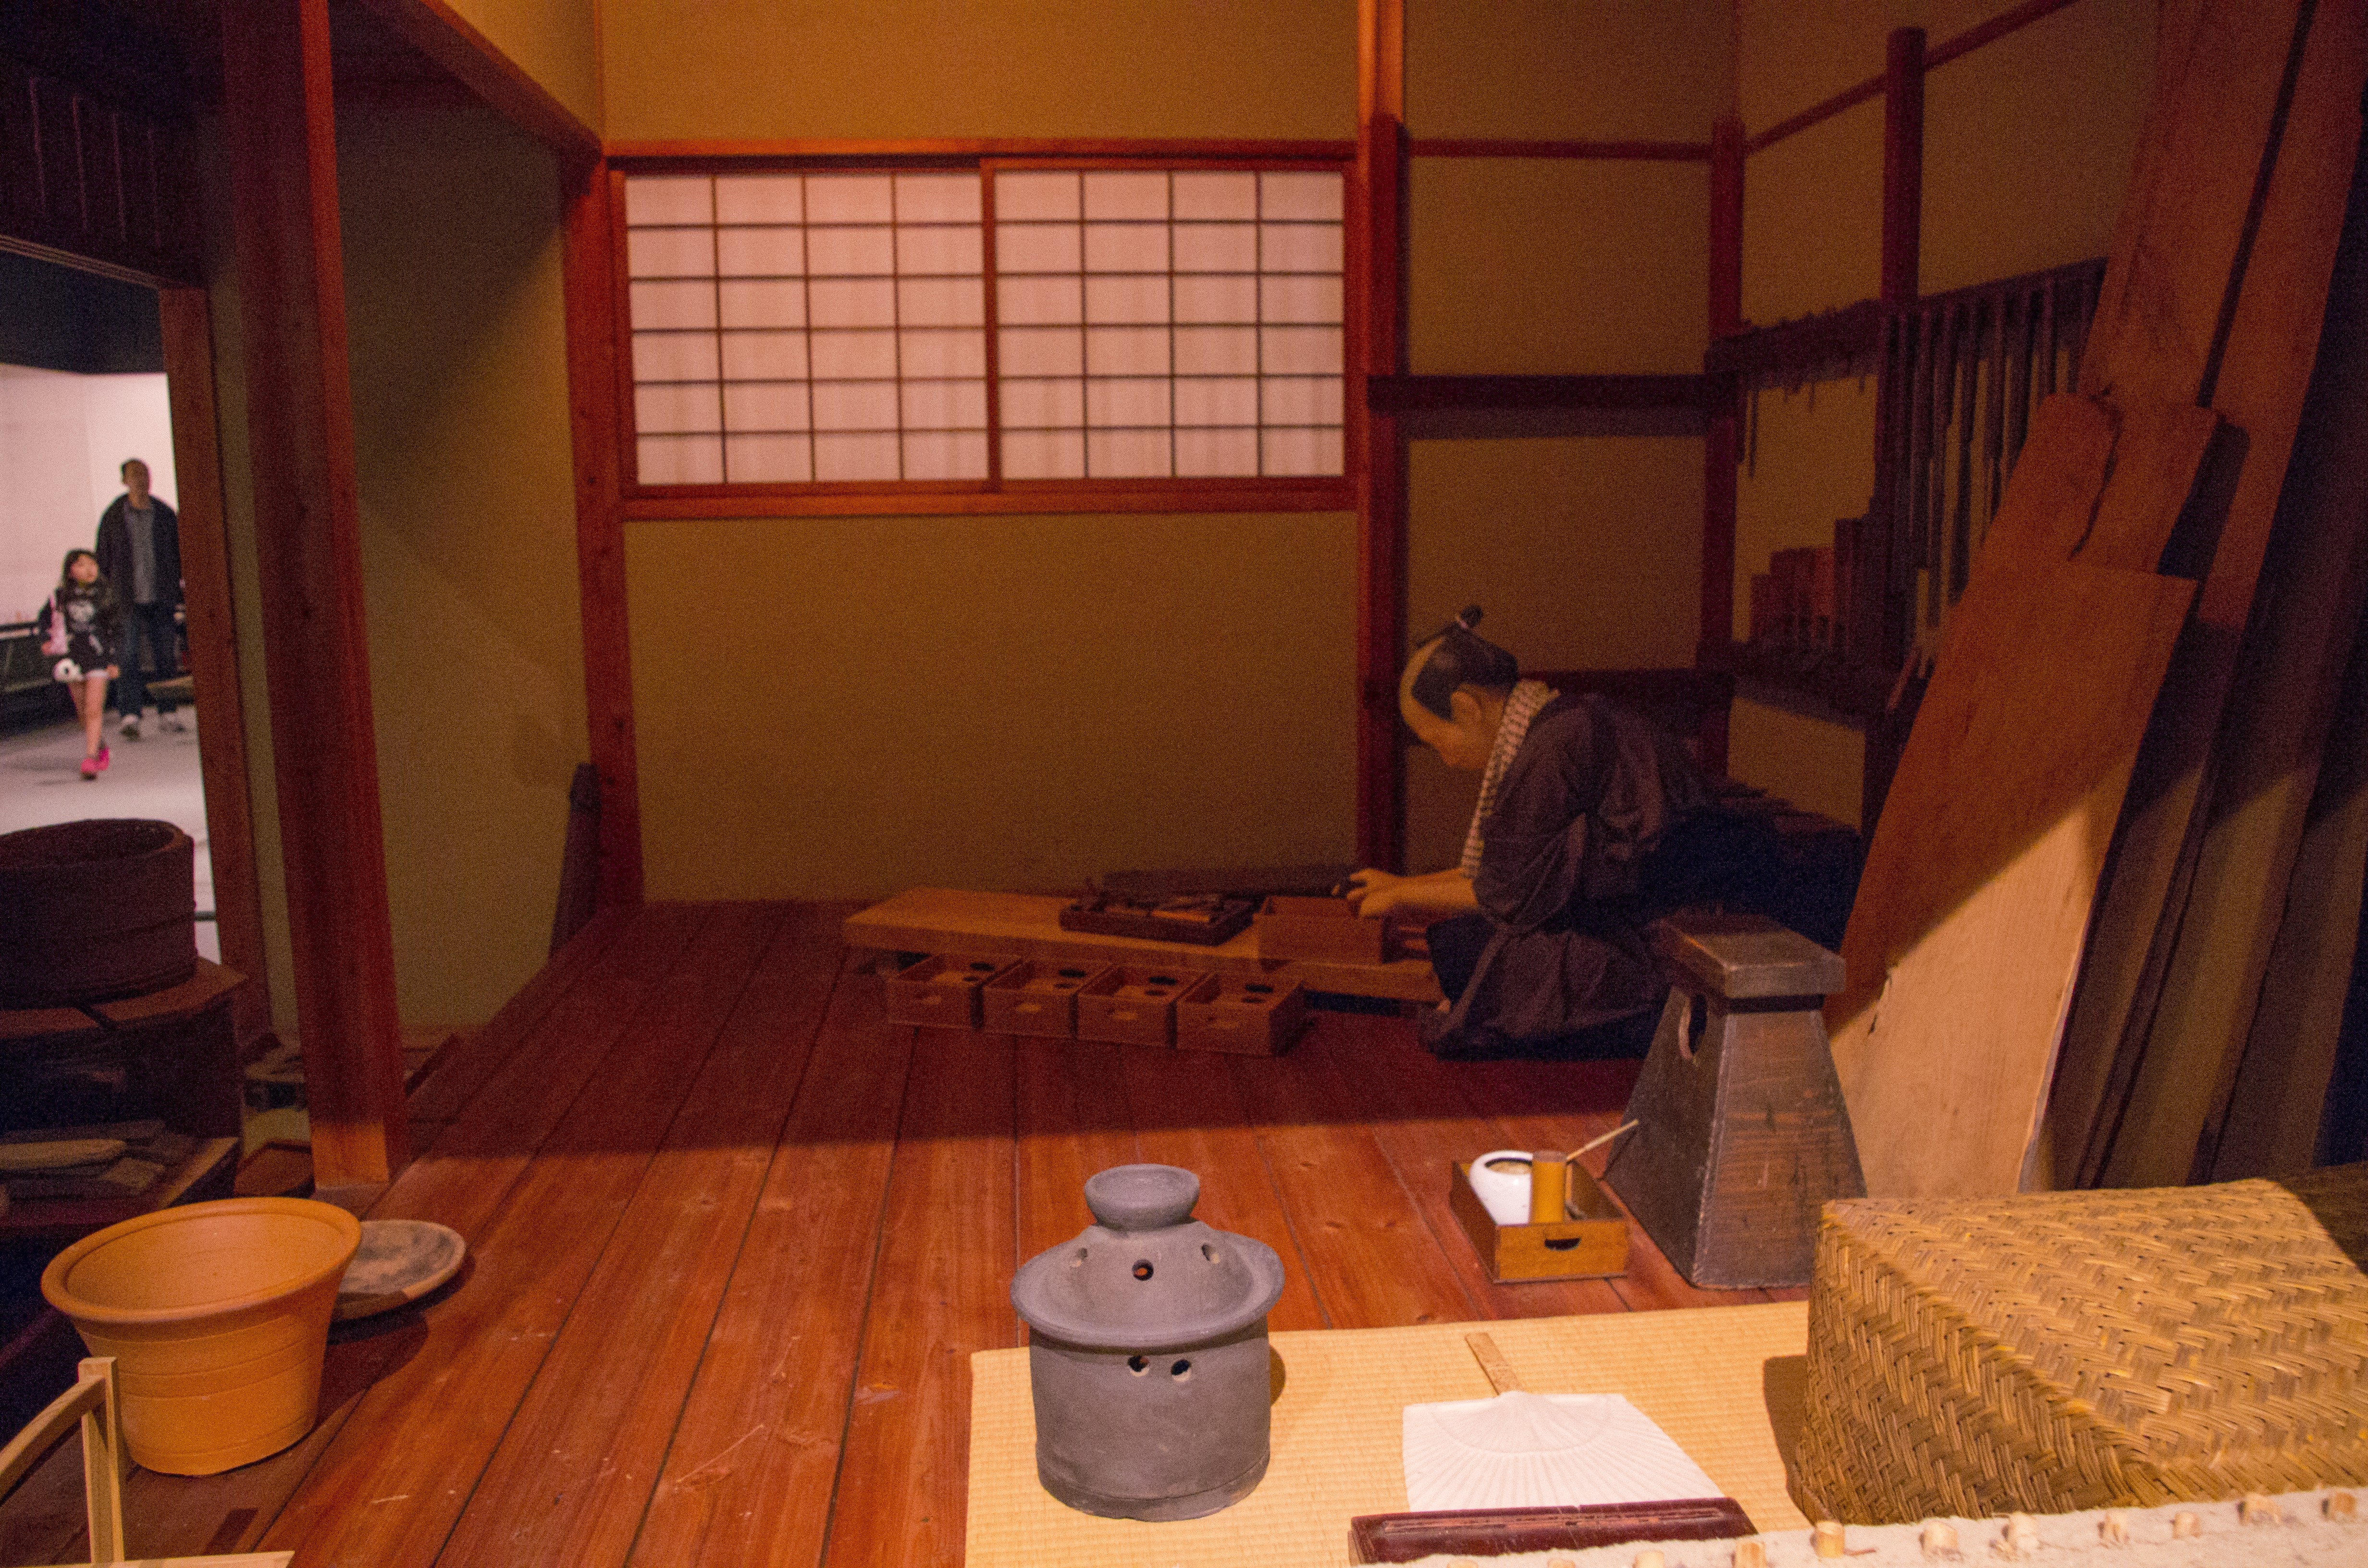 This picture is not of very high quality, but it shows the room of craftsman in the Edo period, inside of Tokyo Edo Museum